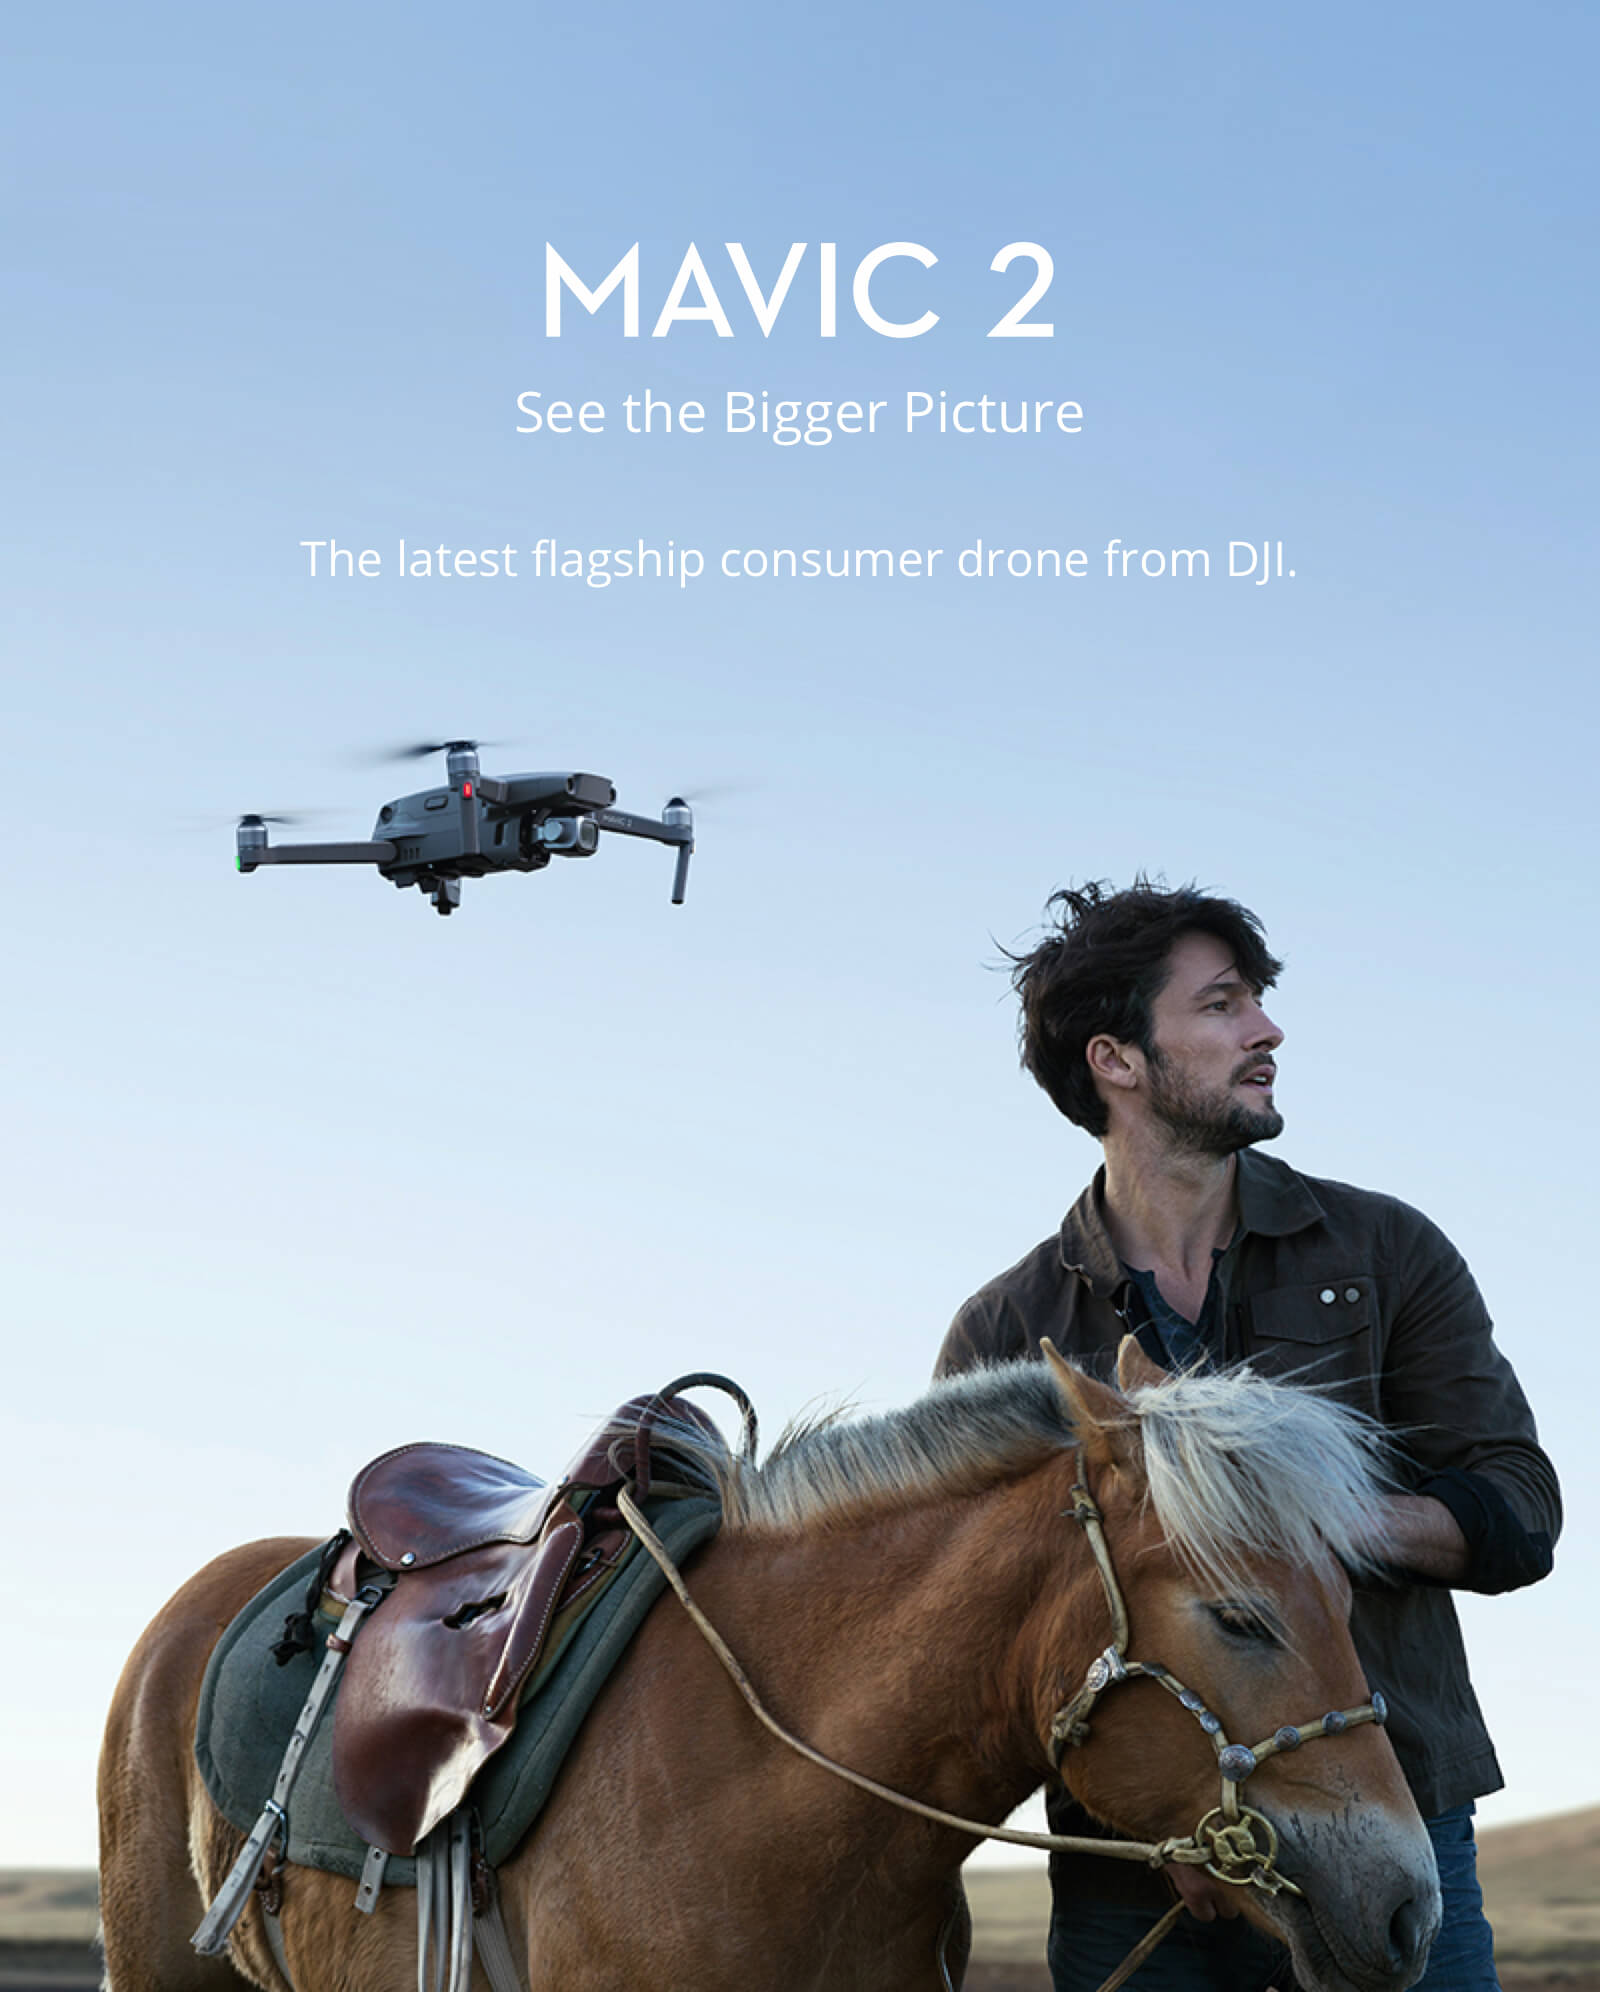 DJI MAVIC 2 ZOOM DRONE QUADCOPTER WITH FLY MORE KIT COMBO